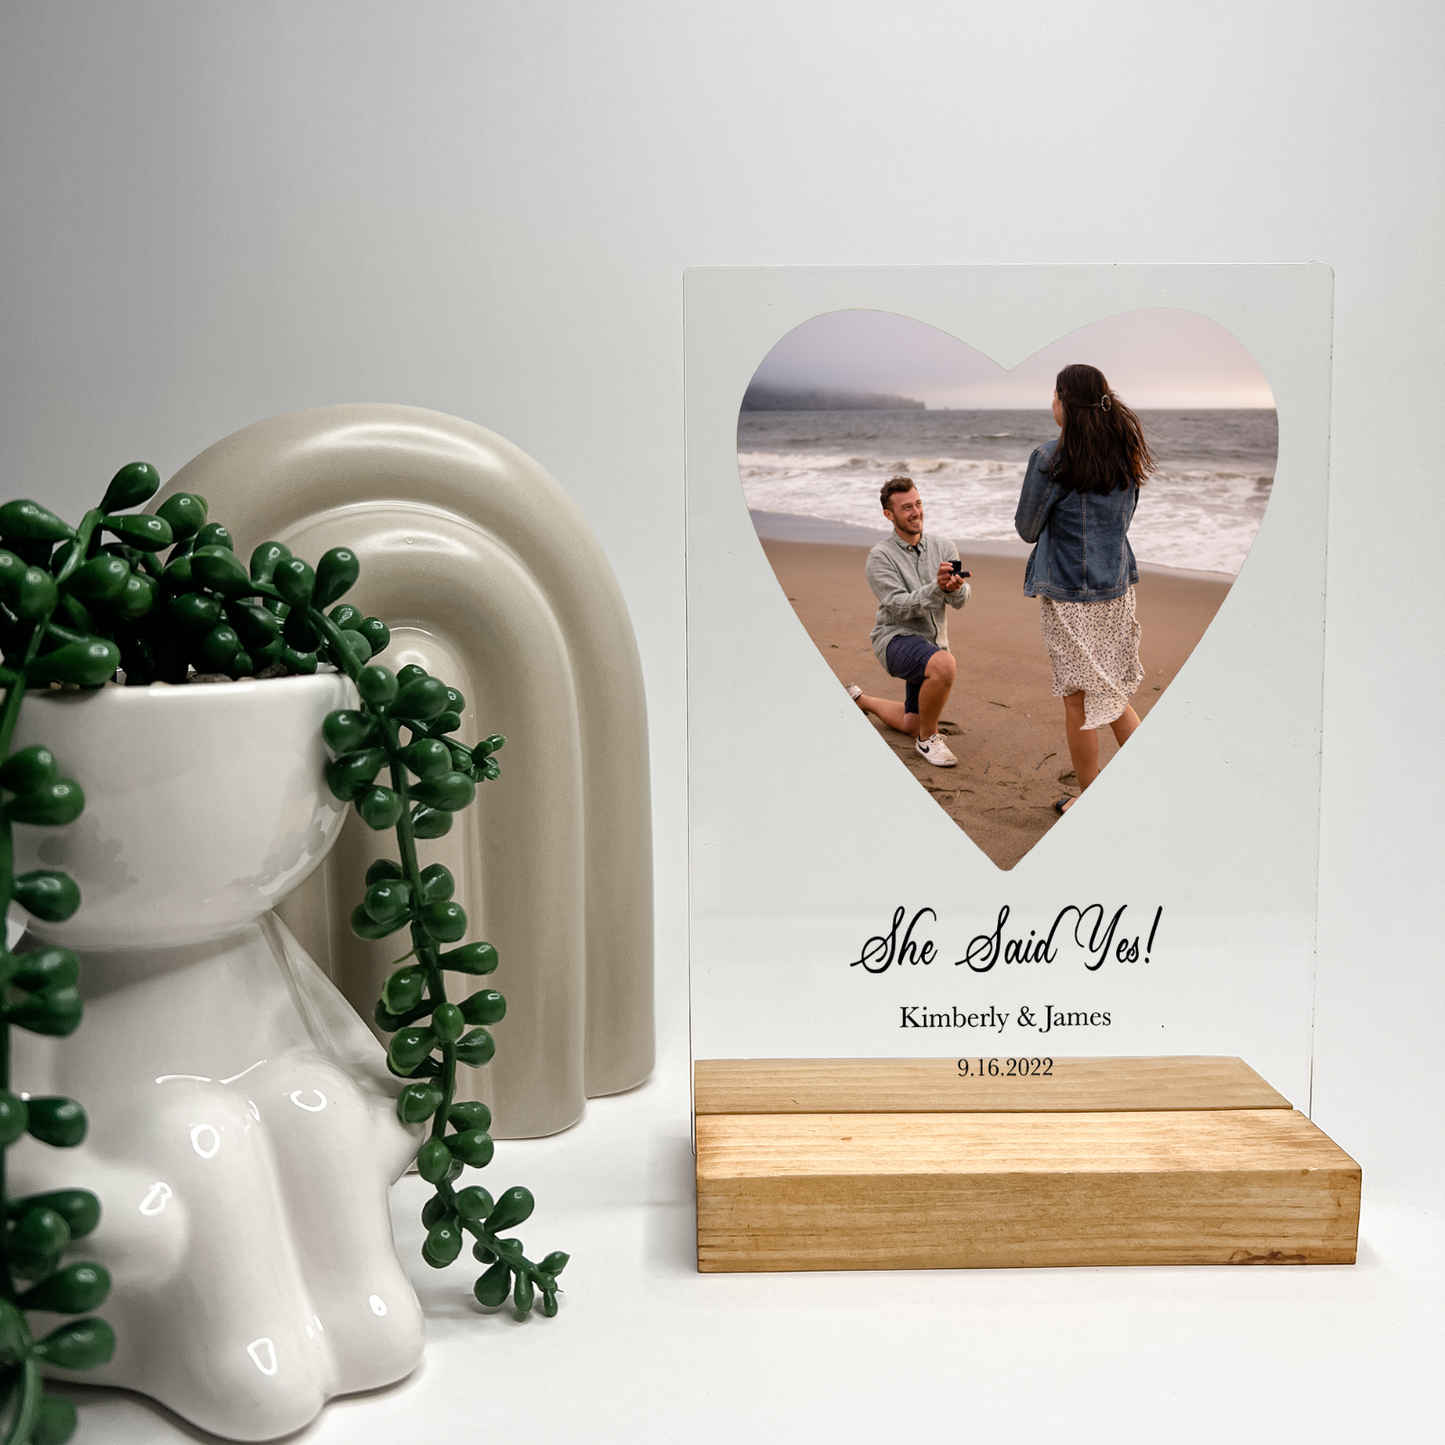 Personalized Heart Shape Photo Frame With Wood Base, Shower, Wedding, Her Gifts